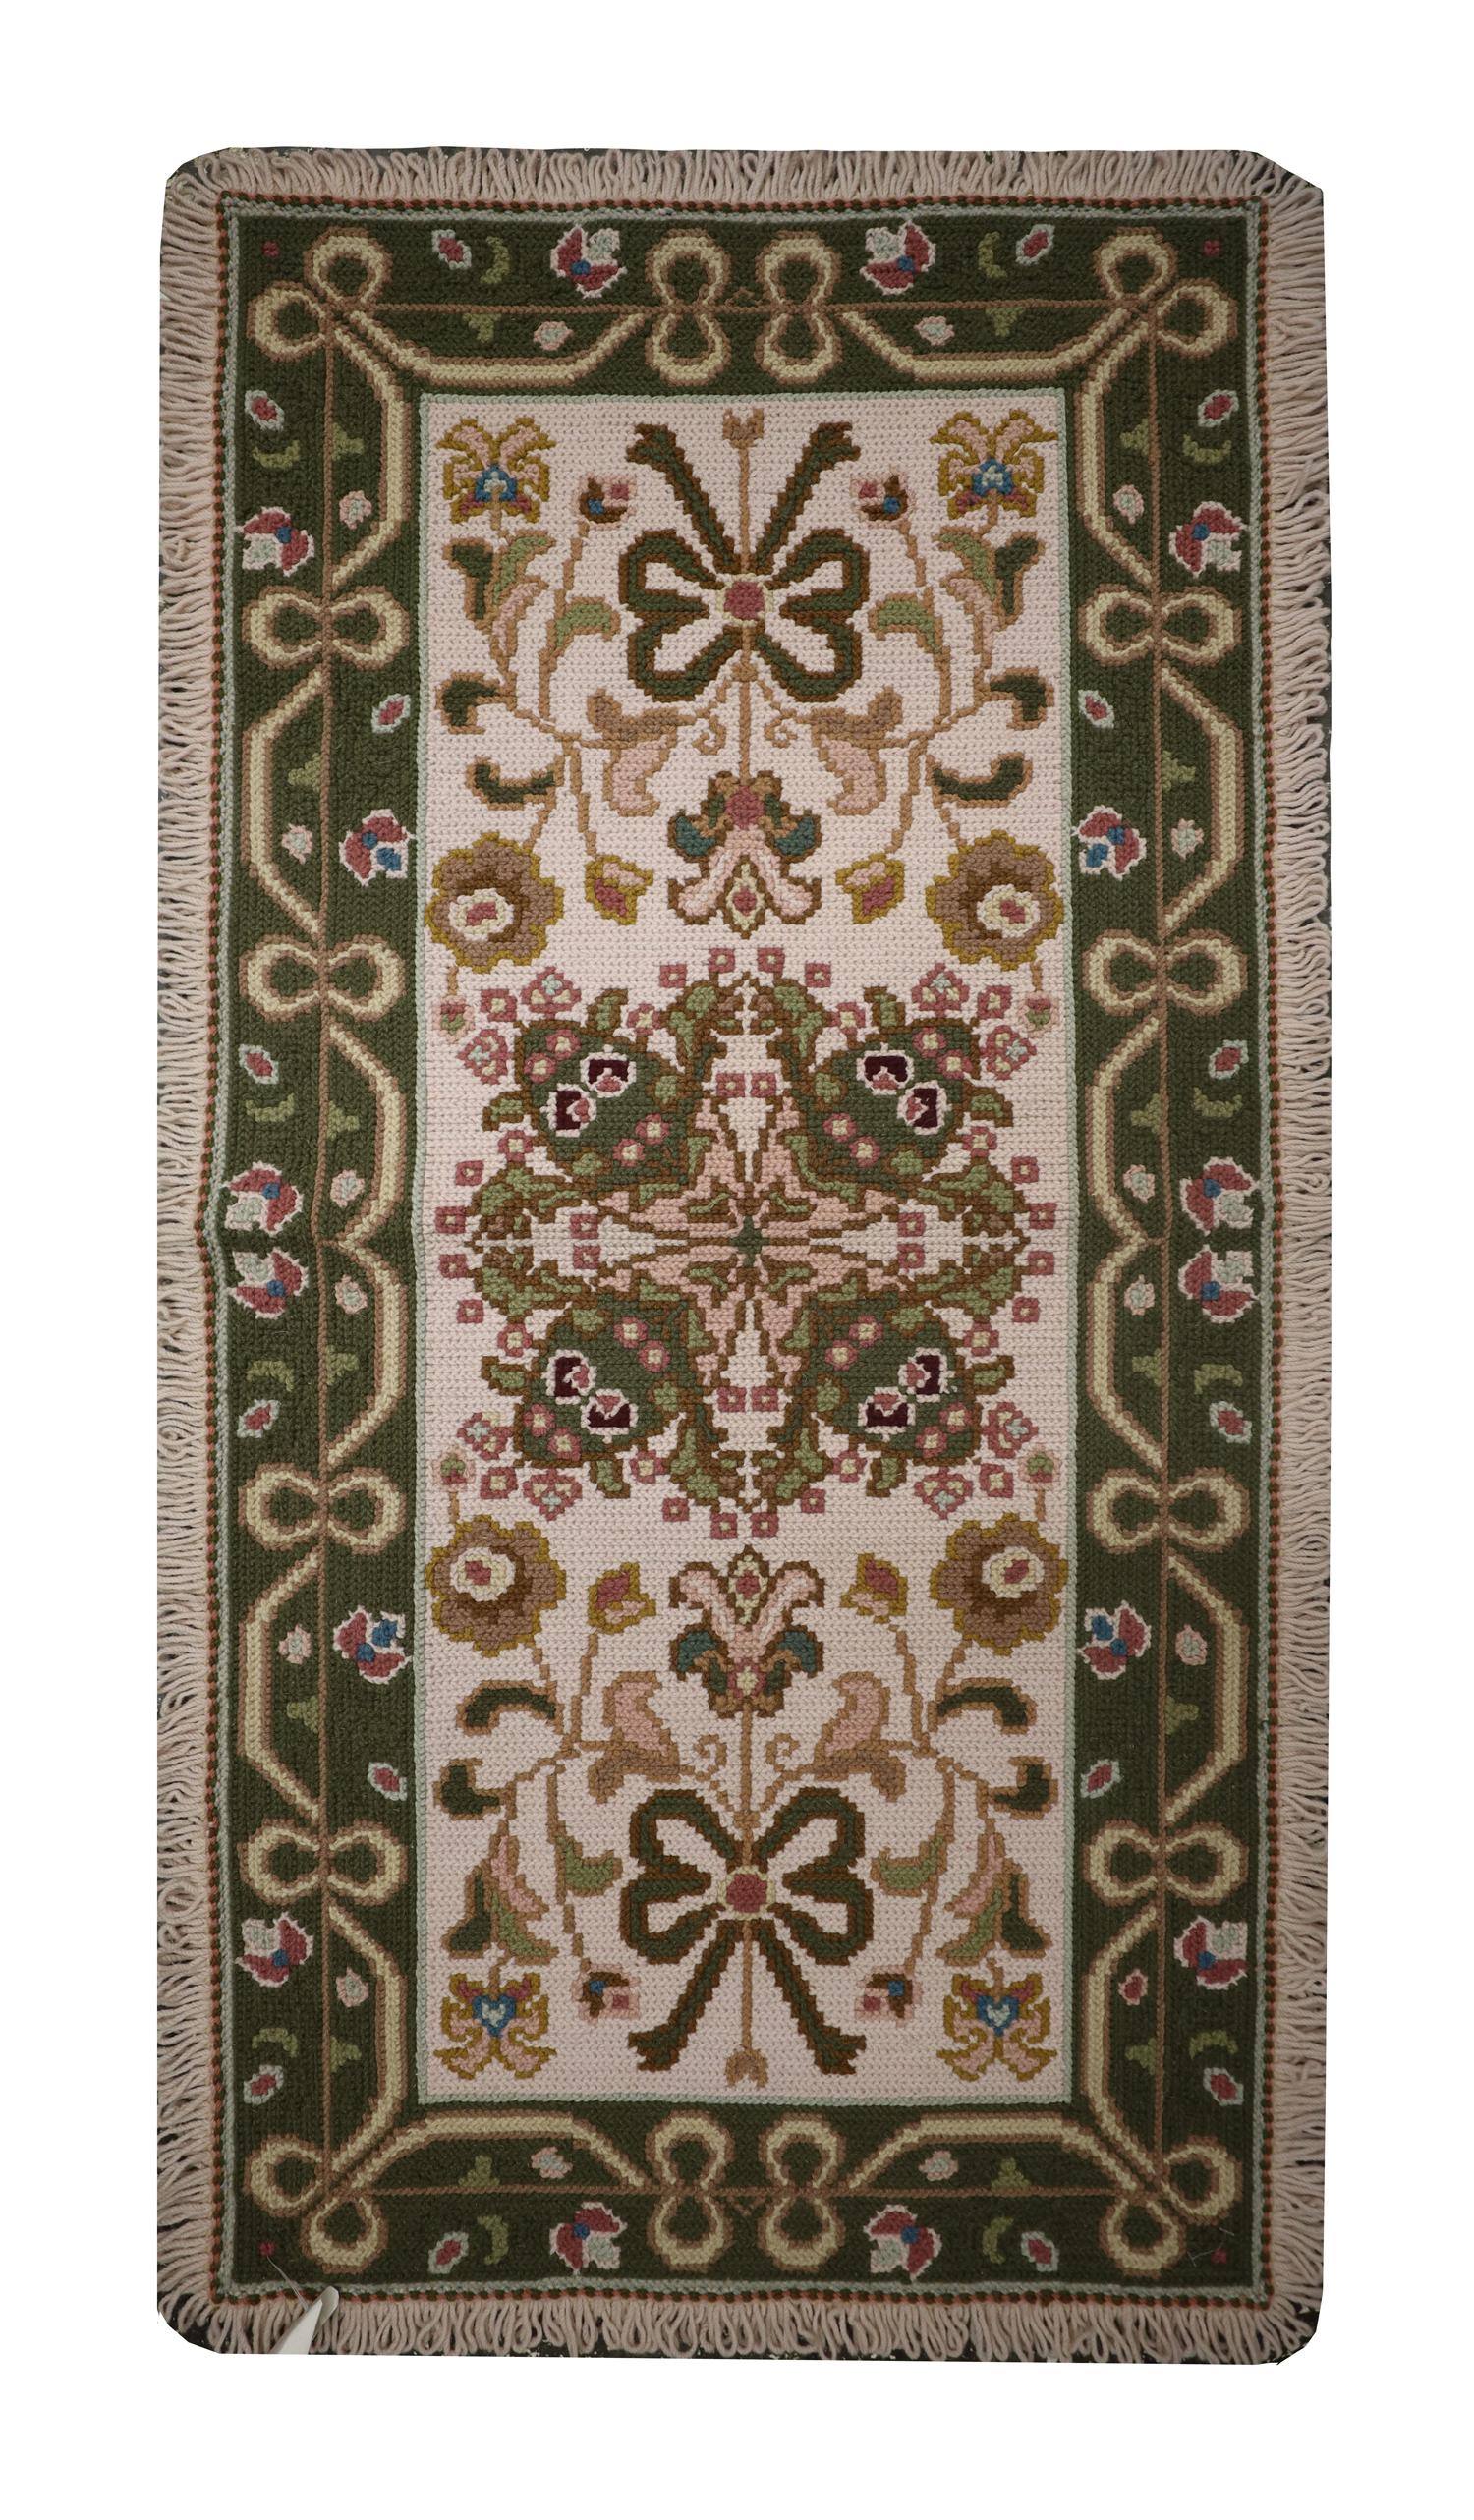 Are you On the lookout for new carpets to enhance your living room or bedroom? These Beautiful rugs could make the perfect accessory. This elegant wool needlepoint is a classic example of a modern Portuguese style rug woven by hand in China in the